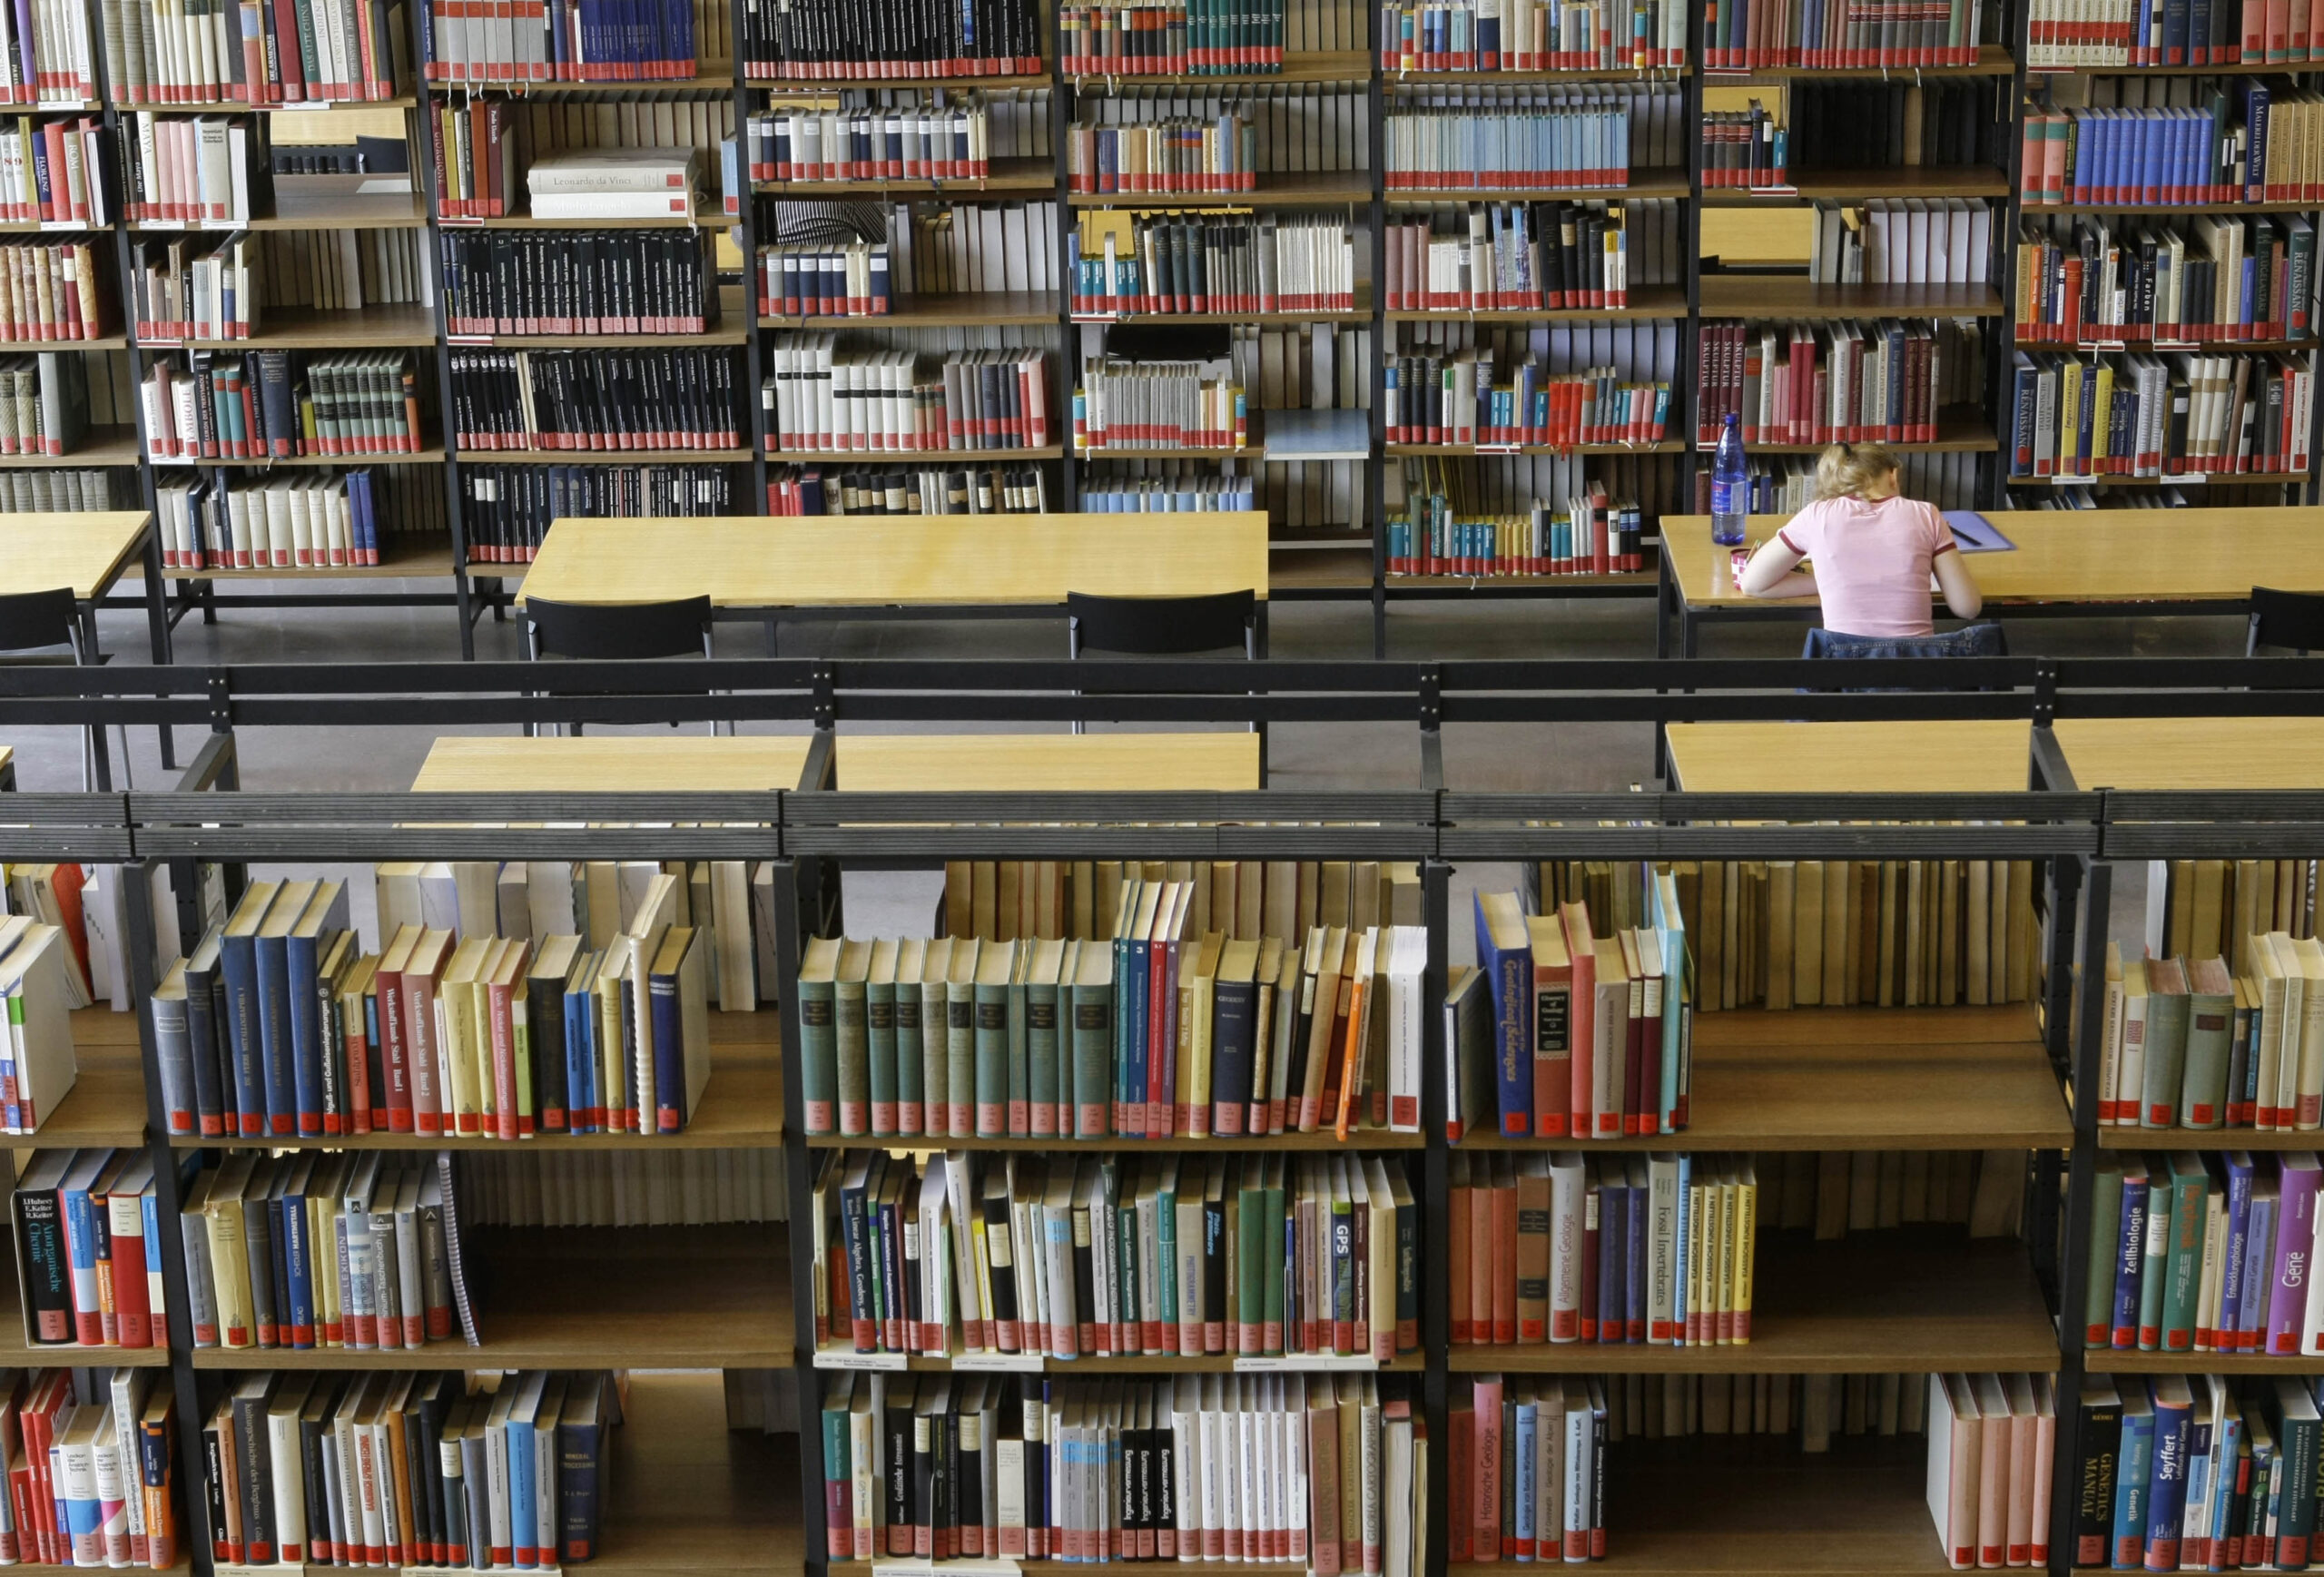 Kenosha County considers asking for ‘secure adult-only’ areas in libraries